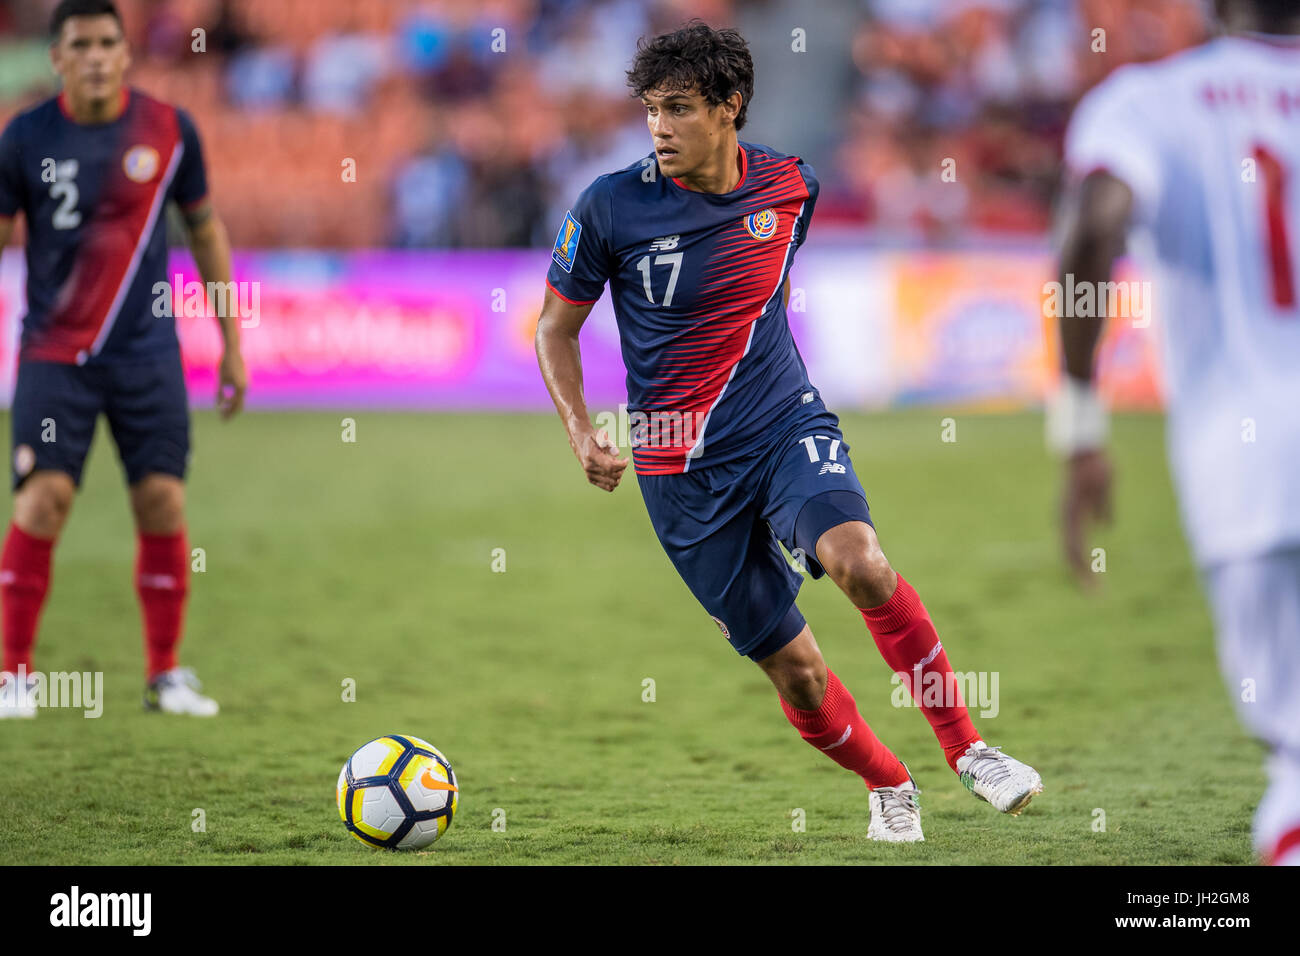 Houston, Texas, USA. 11th July, 2017. Costa Rica midfielder Yeltsin Tejeda (17) controls the ball during the 2nd half of an international CONCACAF Gold Cup soccer match between Canada and Costa Rica at BBVA Compass Stadium in Houston, TX on July 11th, 2017. The game ended in a 1-1 draw. Credit: Trask Smith/ZUMA Wire/Alamy Live News Stock Photo